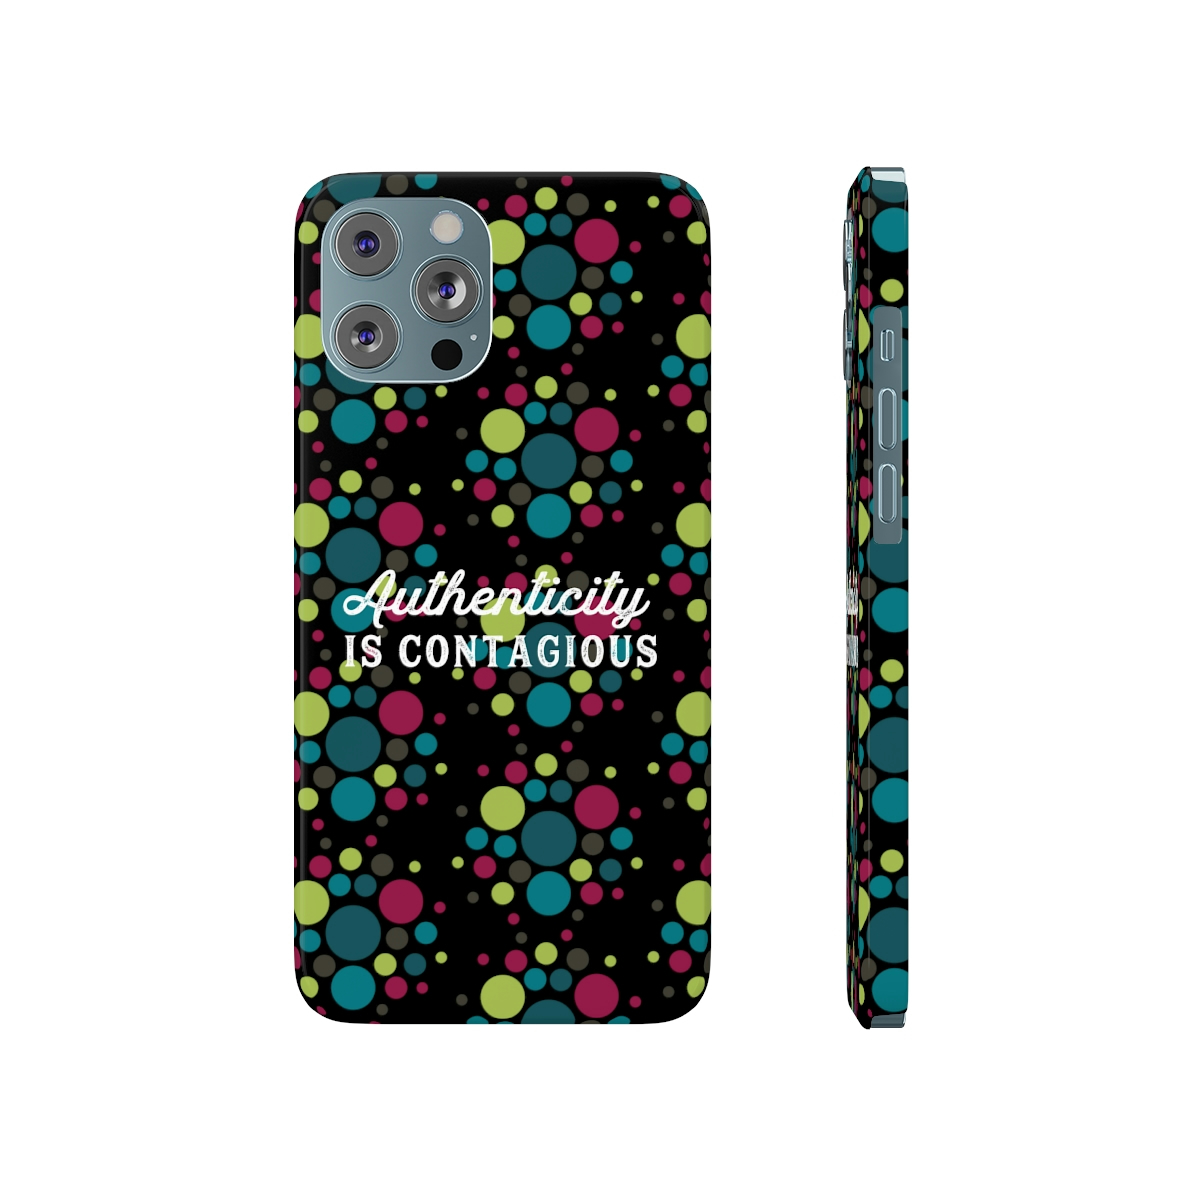 Authenticity is Contagious Barely There Phone Cases